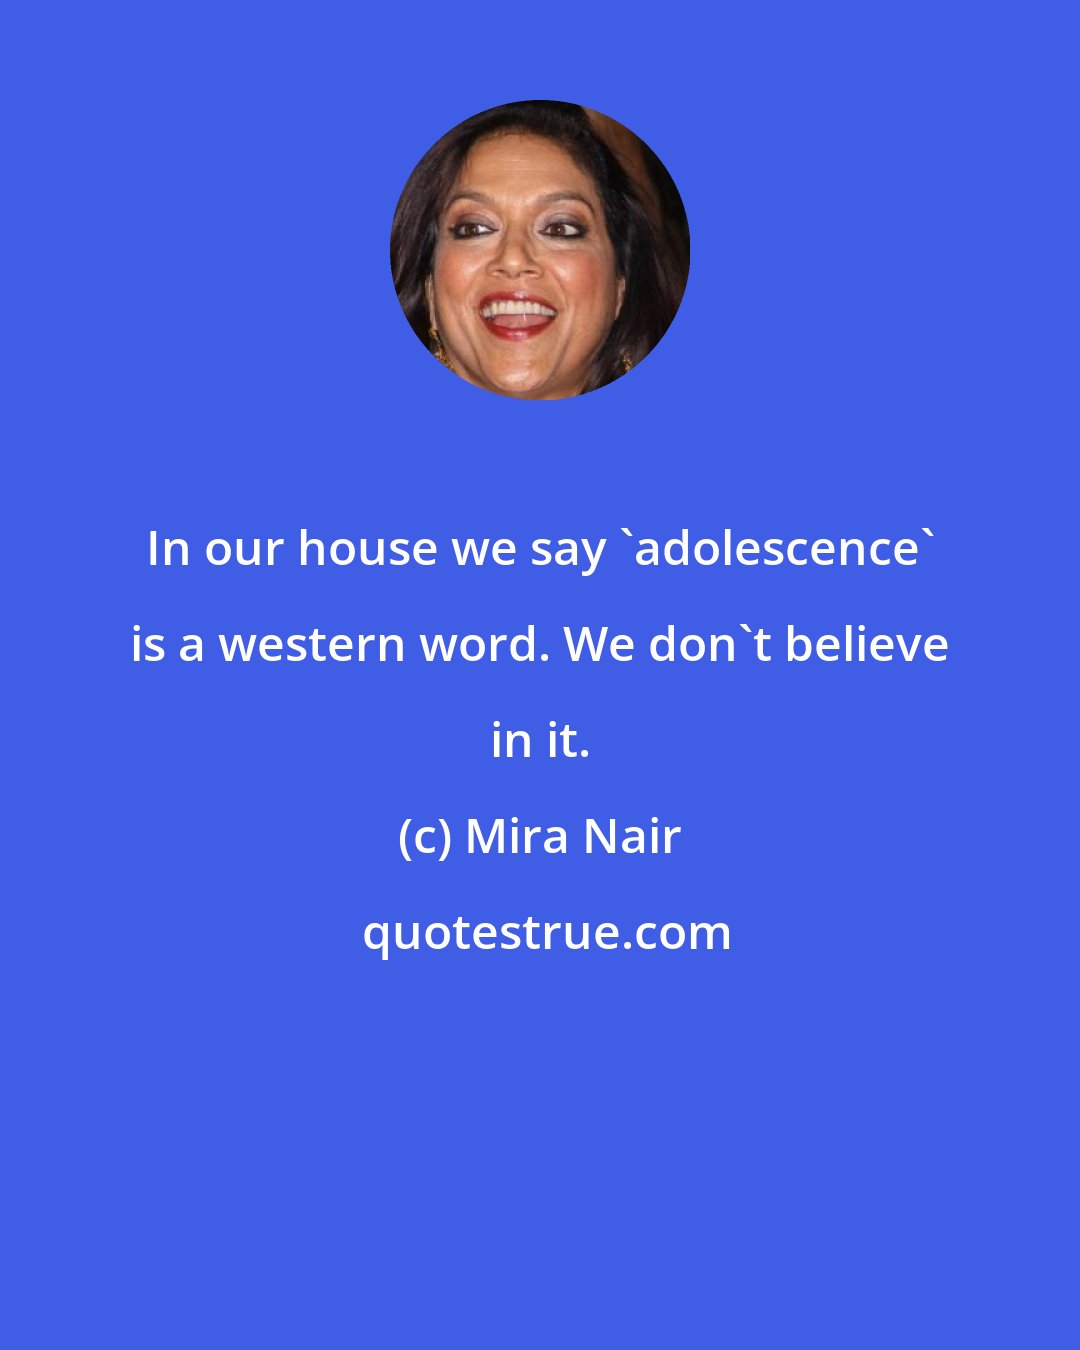 Mira Nair: In our house we say 'adolescence' is a western word. We don't believe in it.